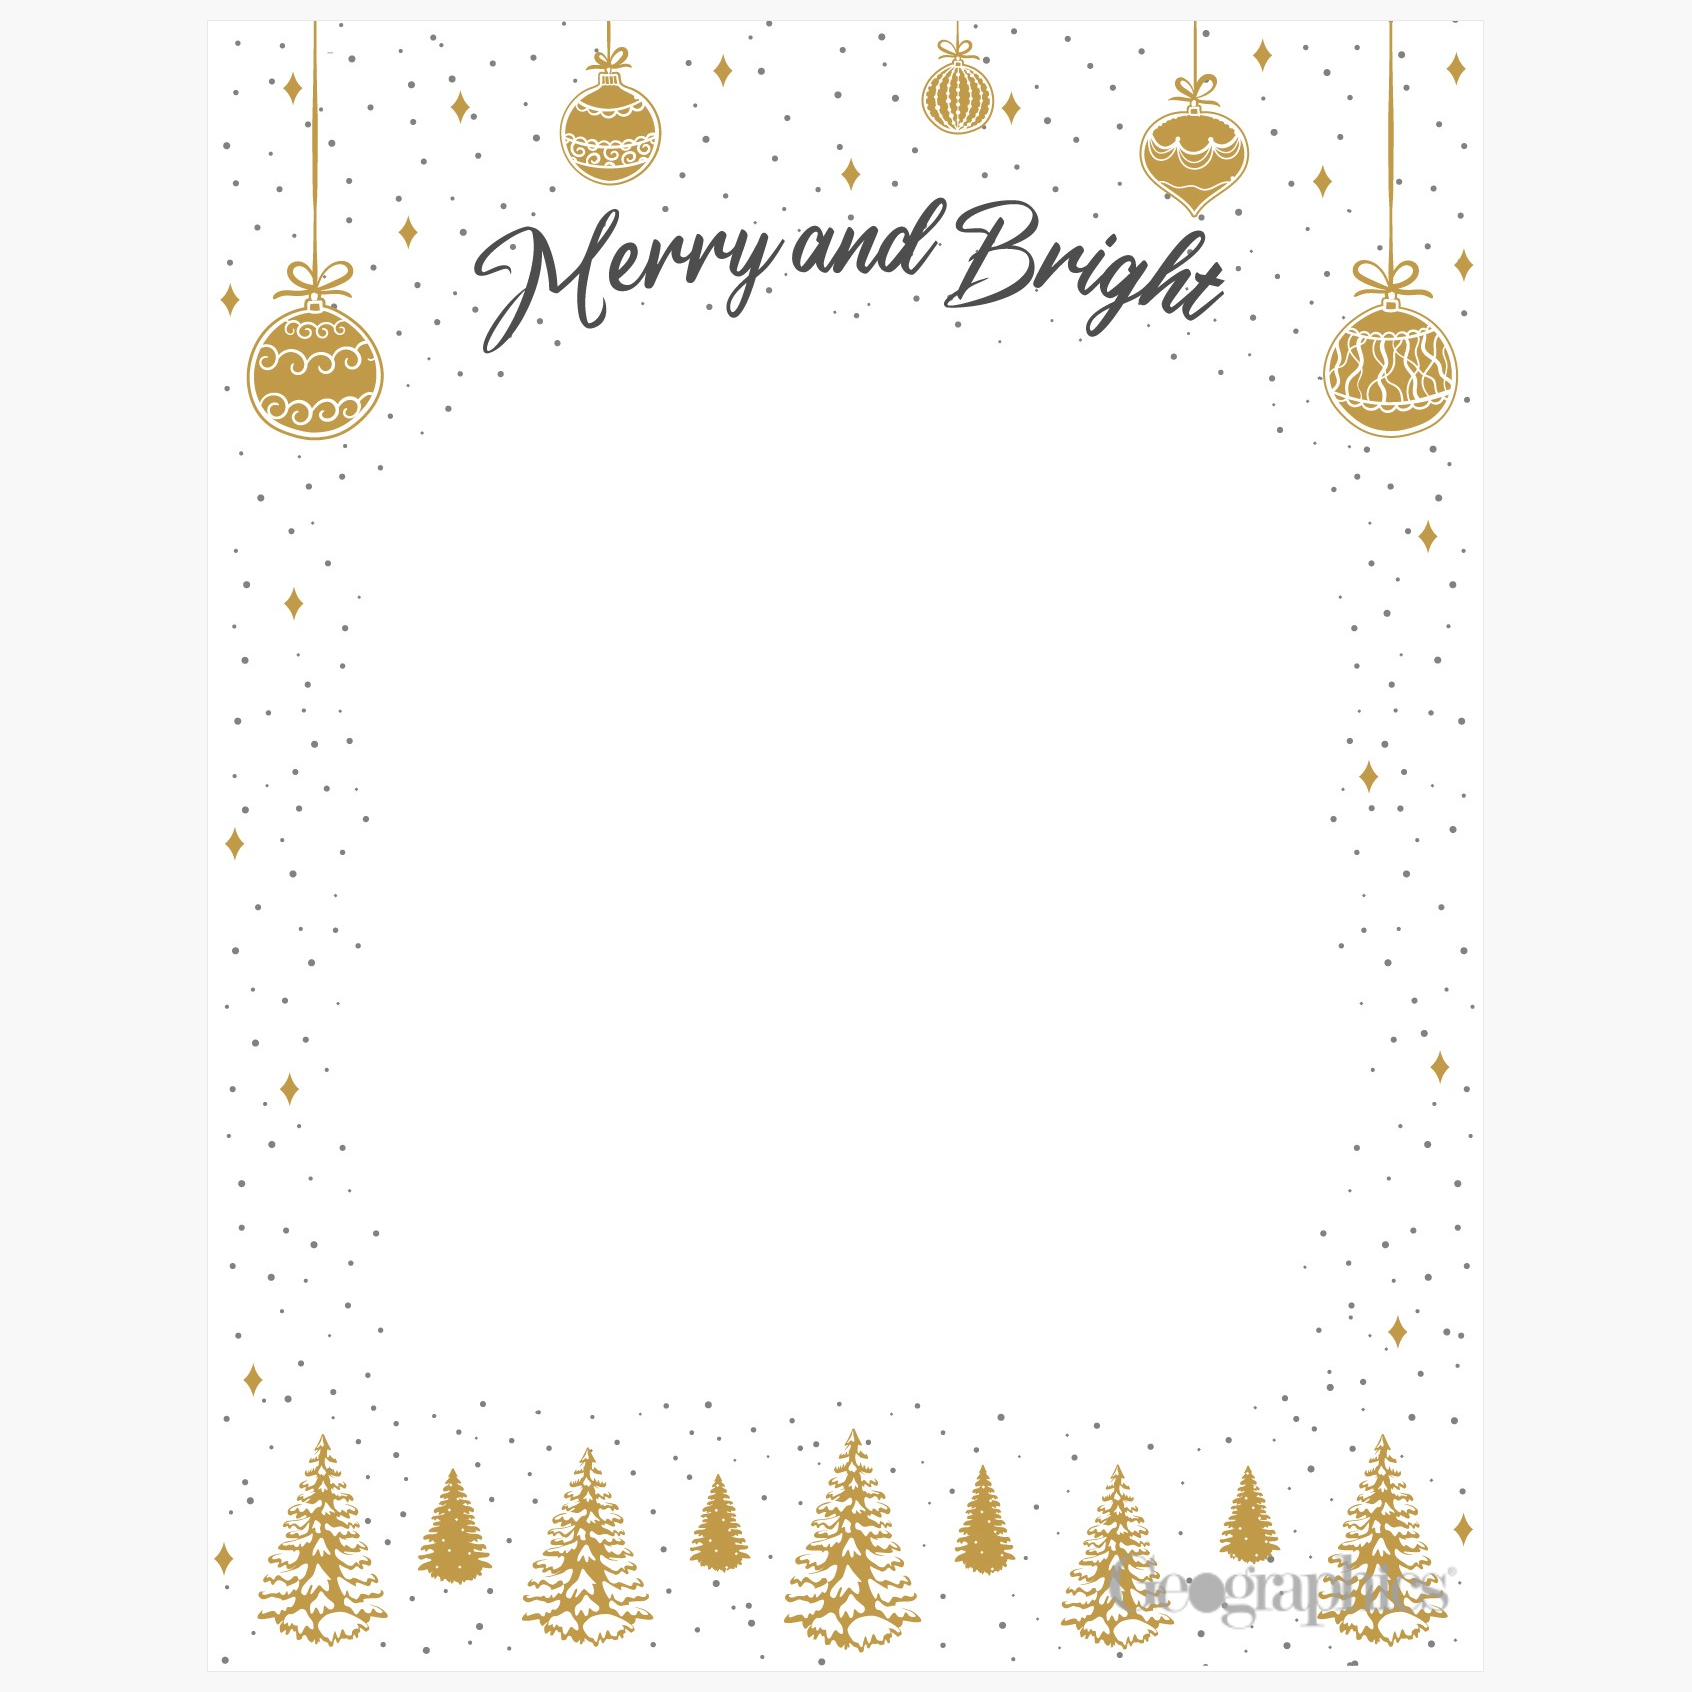 Merry-and-Bright-letterhead-Geographics-49246